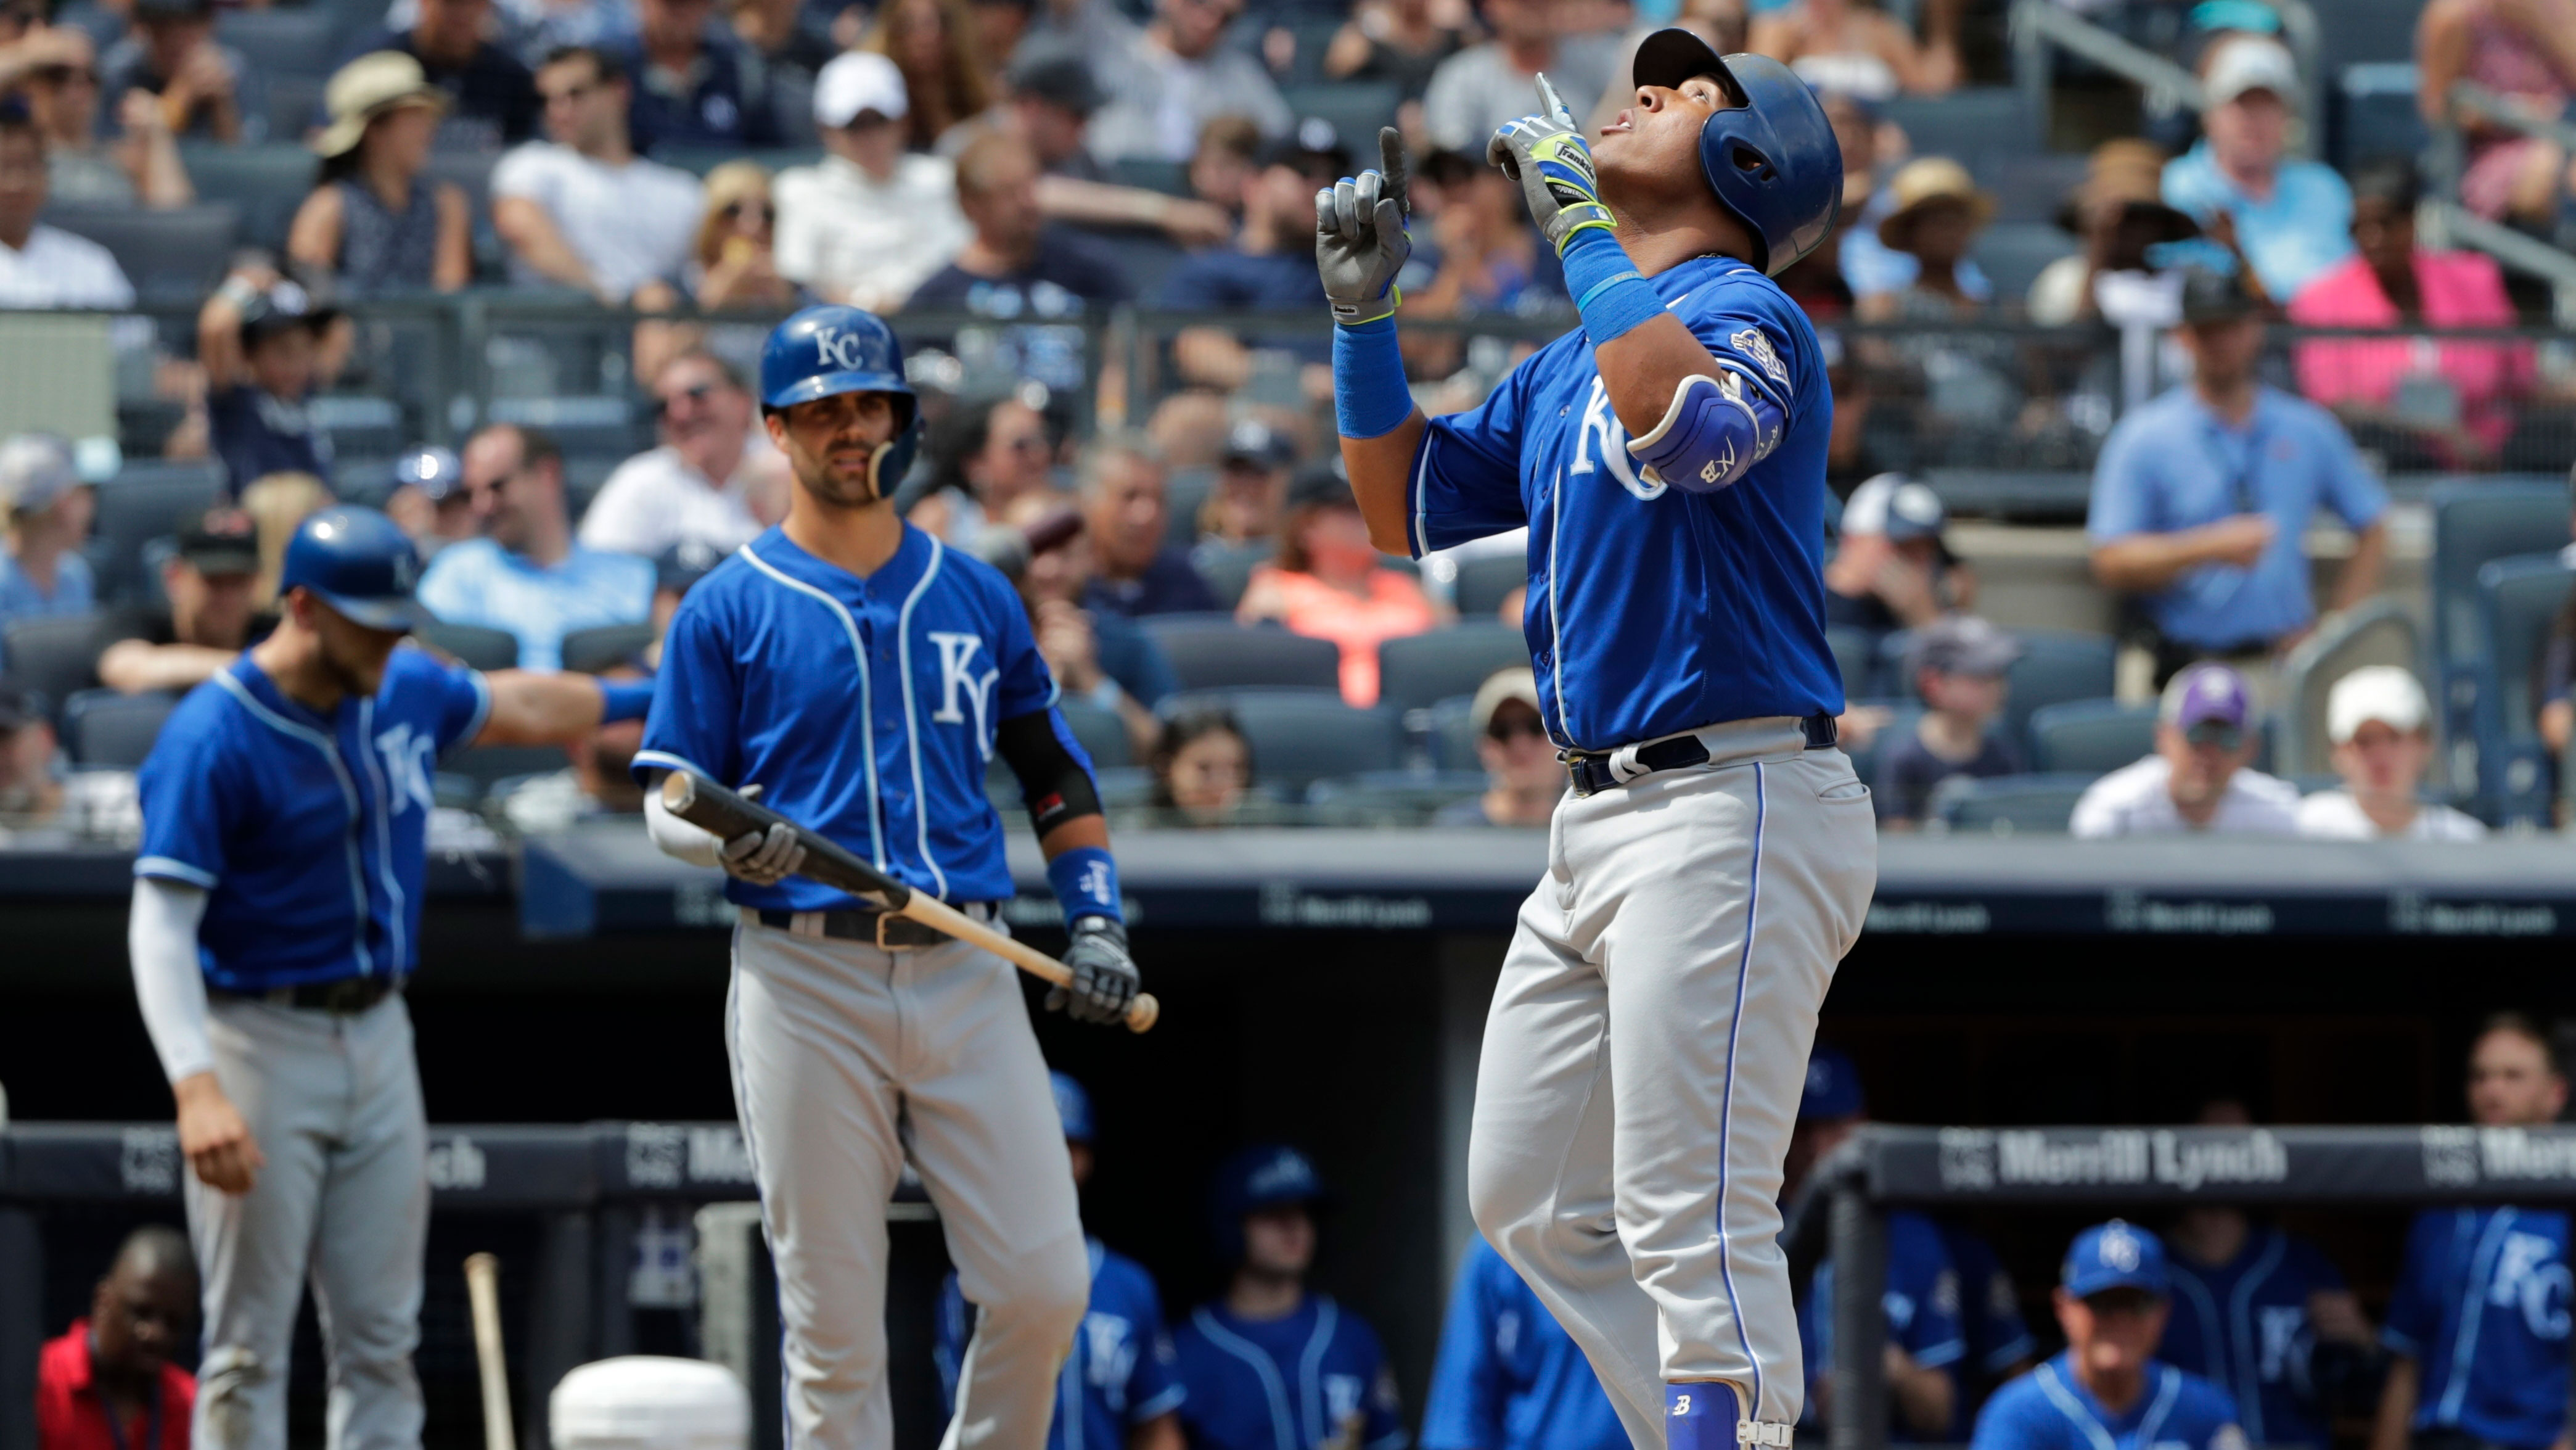 Three homers not enough to push Royals past Yankees in 6-3 defeat